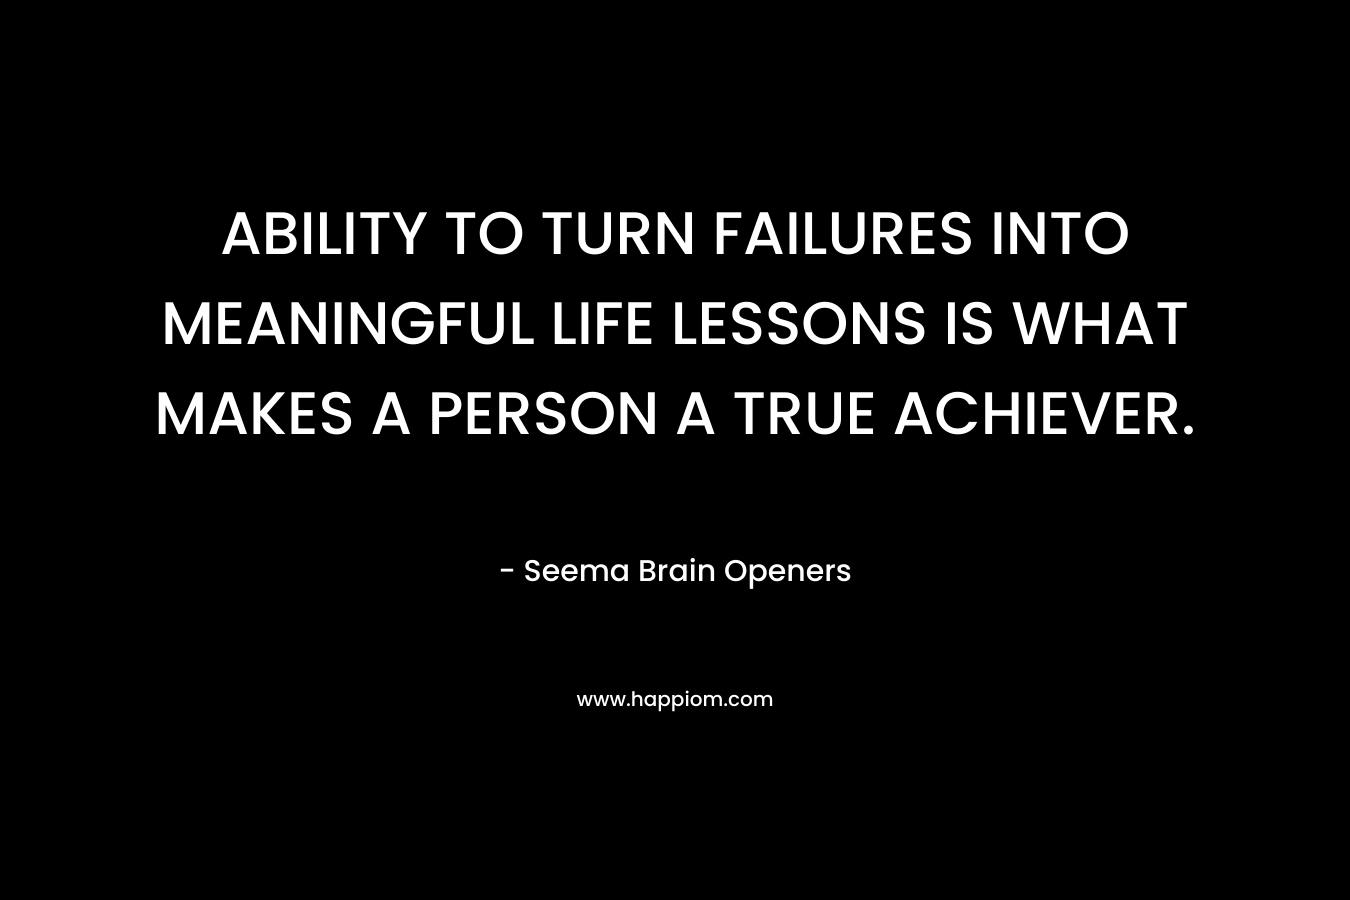 ABILITY TO TURN FAILURES INTO MEANINGFUL LIFE LESSONS IS WHAT MAKES A PERSON A TRUE ACHIEVER.